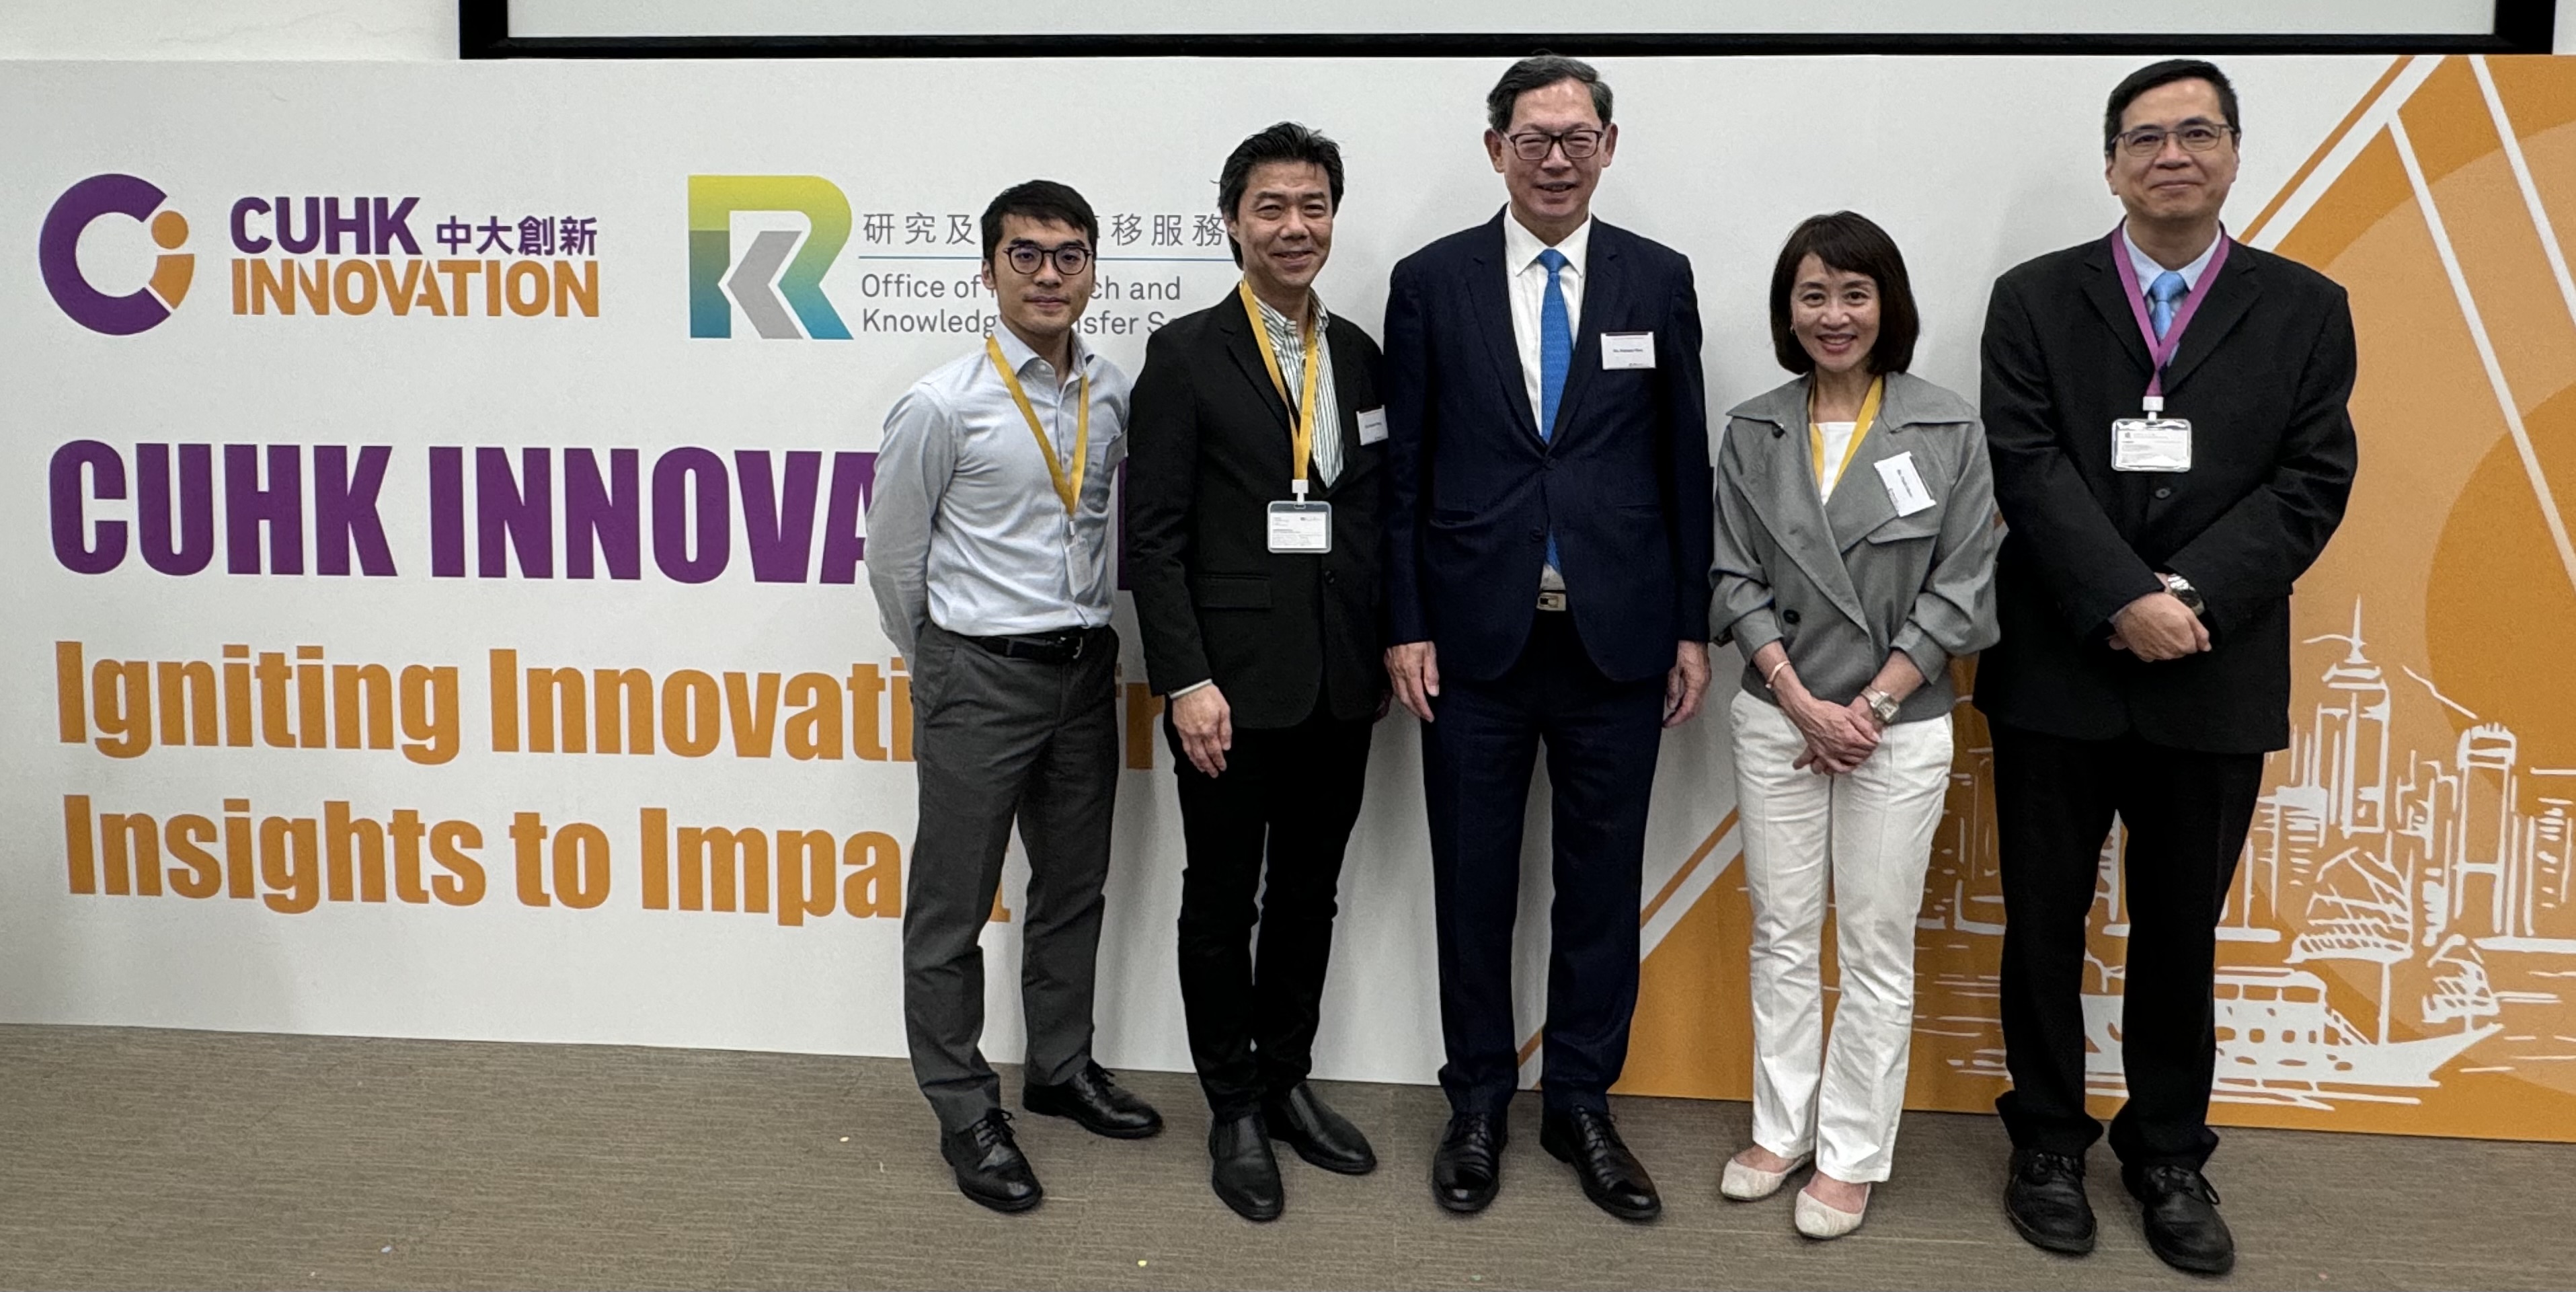 CUHK Innovation Limited has announced its investment in BioMed, marking its first investment since its establishment. Pictured are Mr. Vincent Tsang, CEO and Co-founder of BioMed (second from the left), Dr. Norman Chan, Chairman of CUHK Innovation Limited (third from the left), Ms. Cindy Chow, Director of CUHK Innovation Limited (second from the right), and Professor Stephen Tsui, Co-founder of BioMed and Associate Director (Research) of School of Biomedical Sciences, CUHK (first from the right).